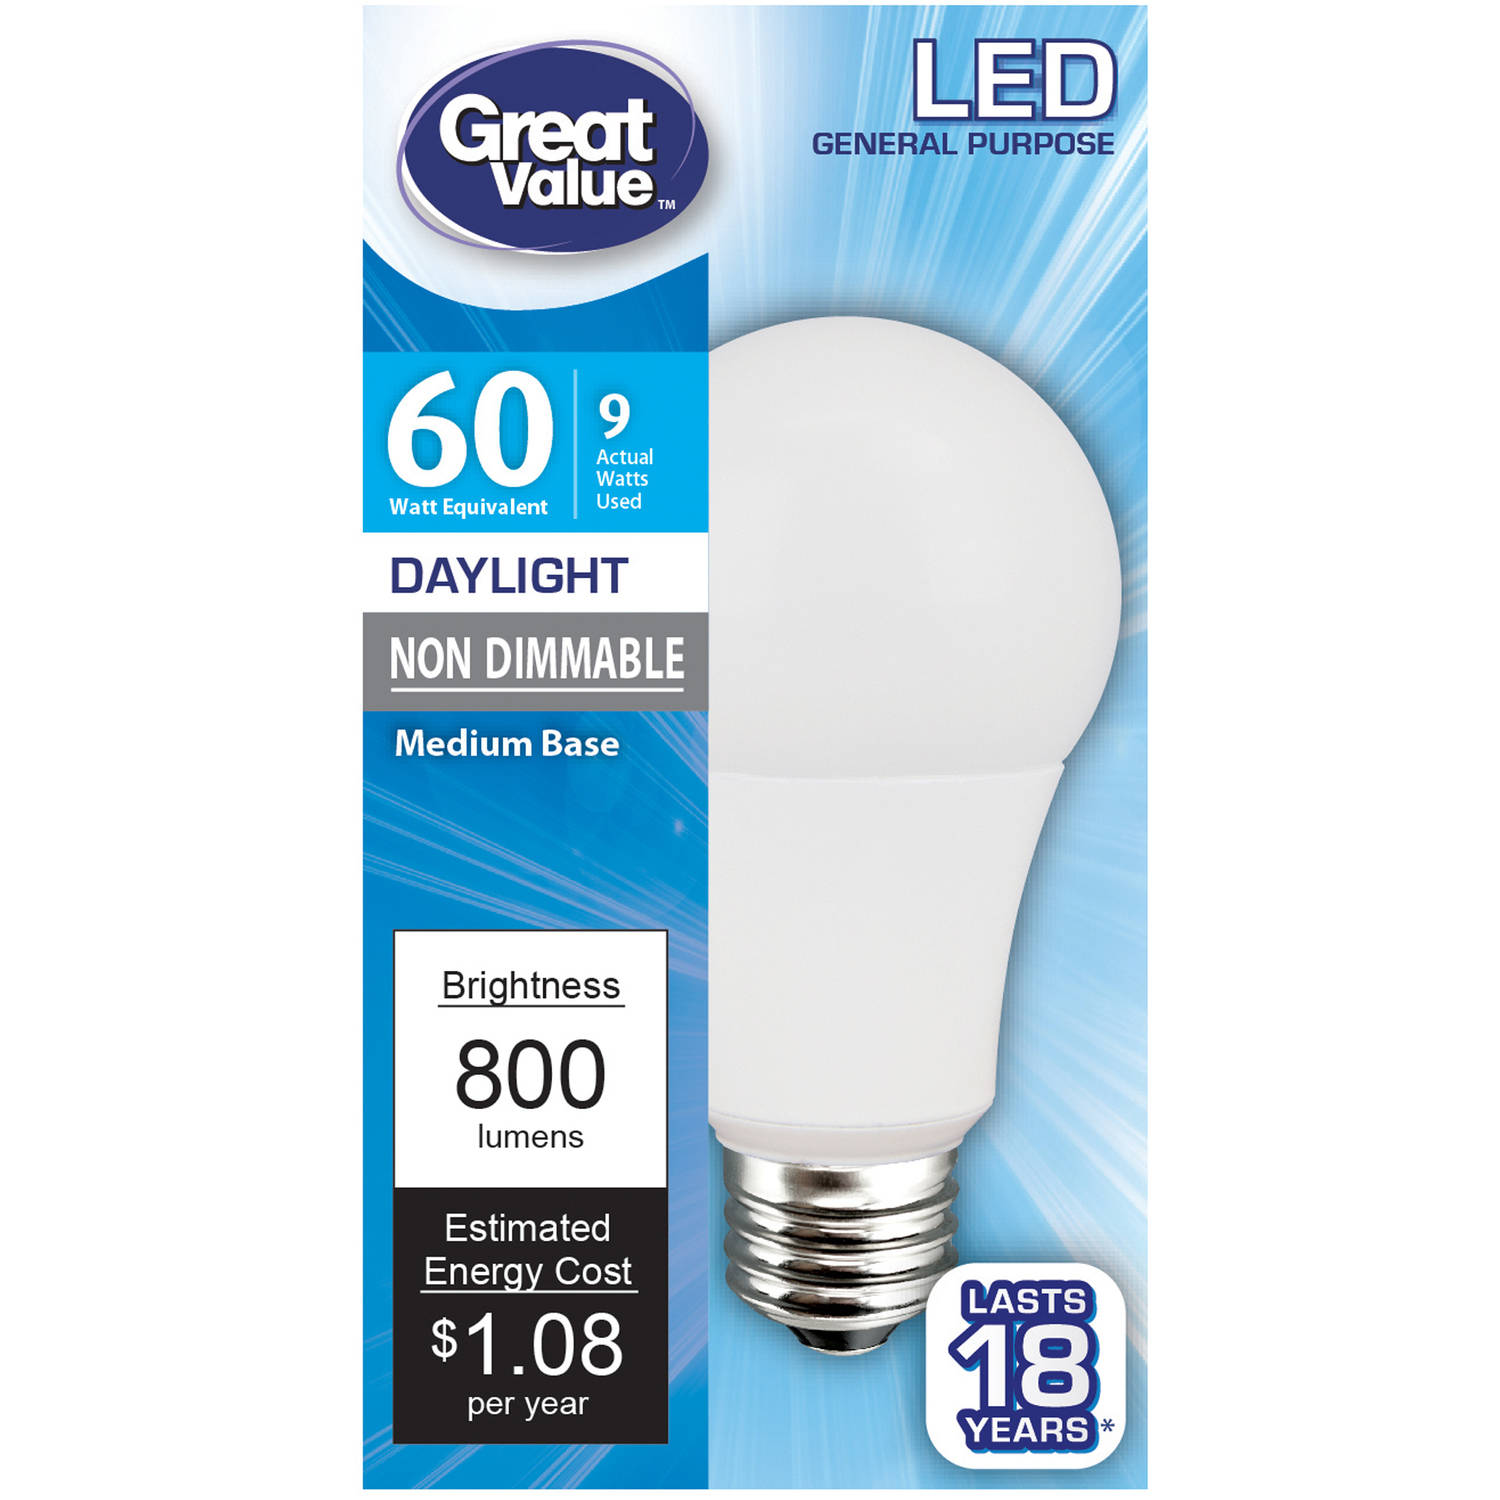 Great Value LED Light Bulb, 9W (60W Equivalent) A19 Lamp E26 Medium Base, Non-Dimmable, Daylight - image 1 of 9